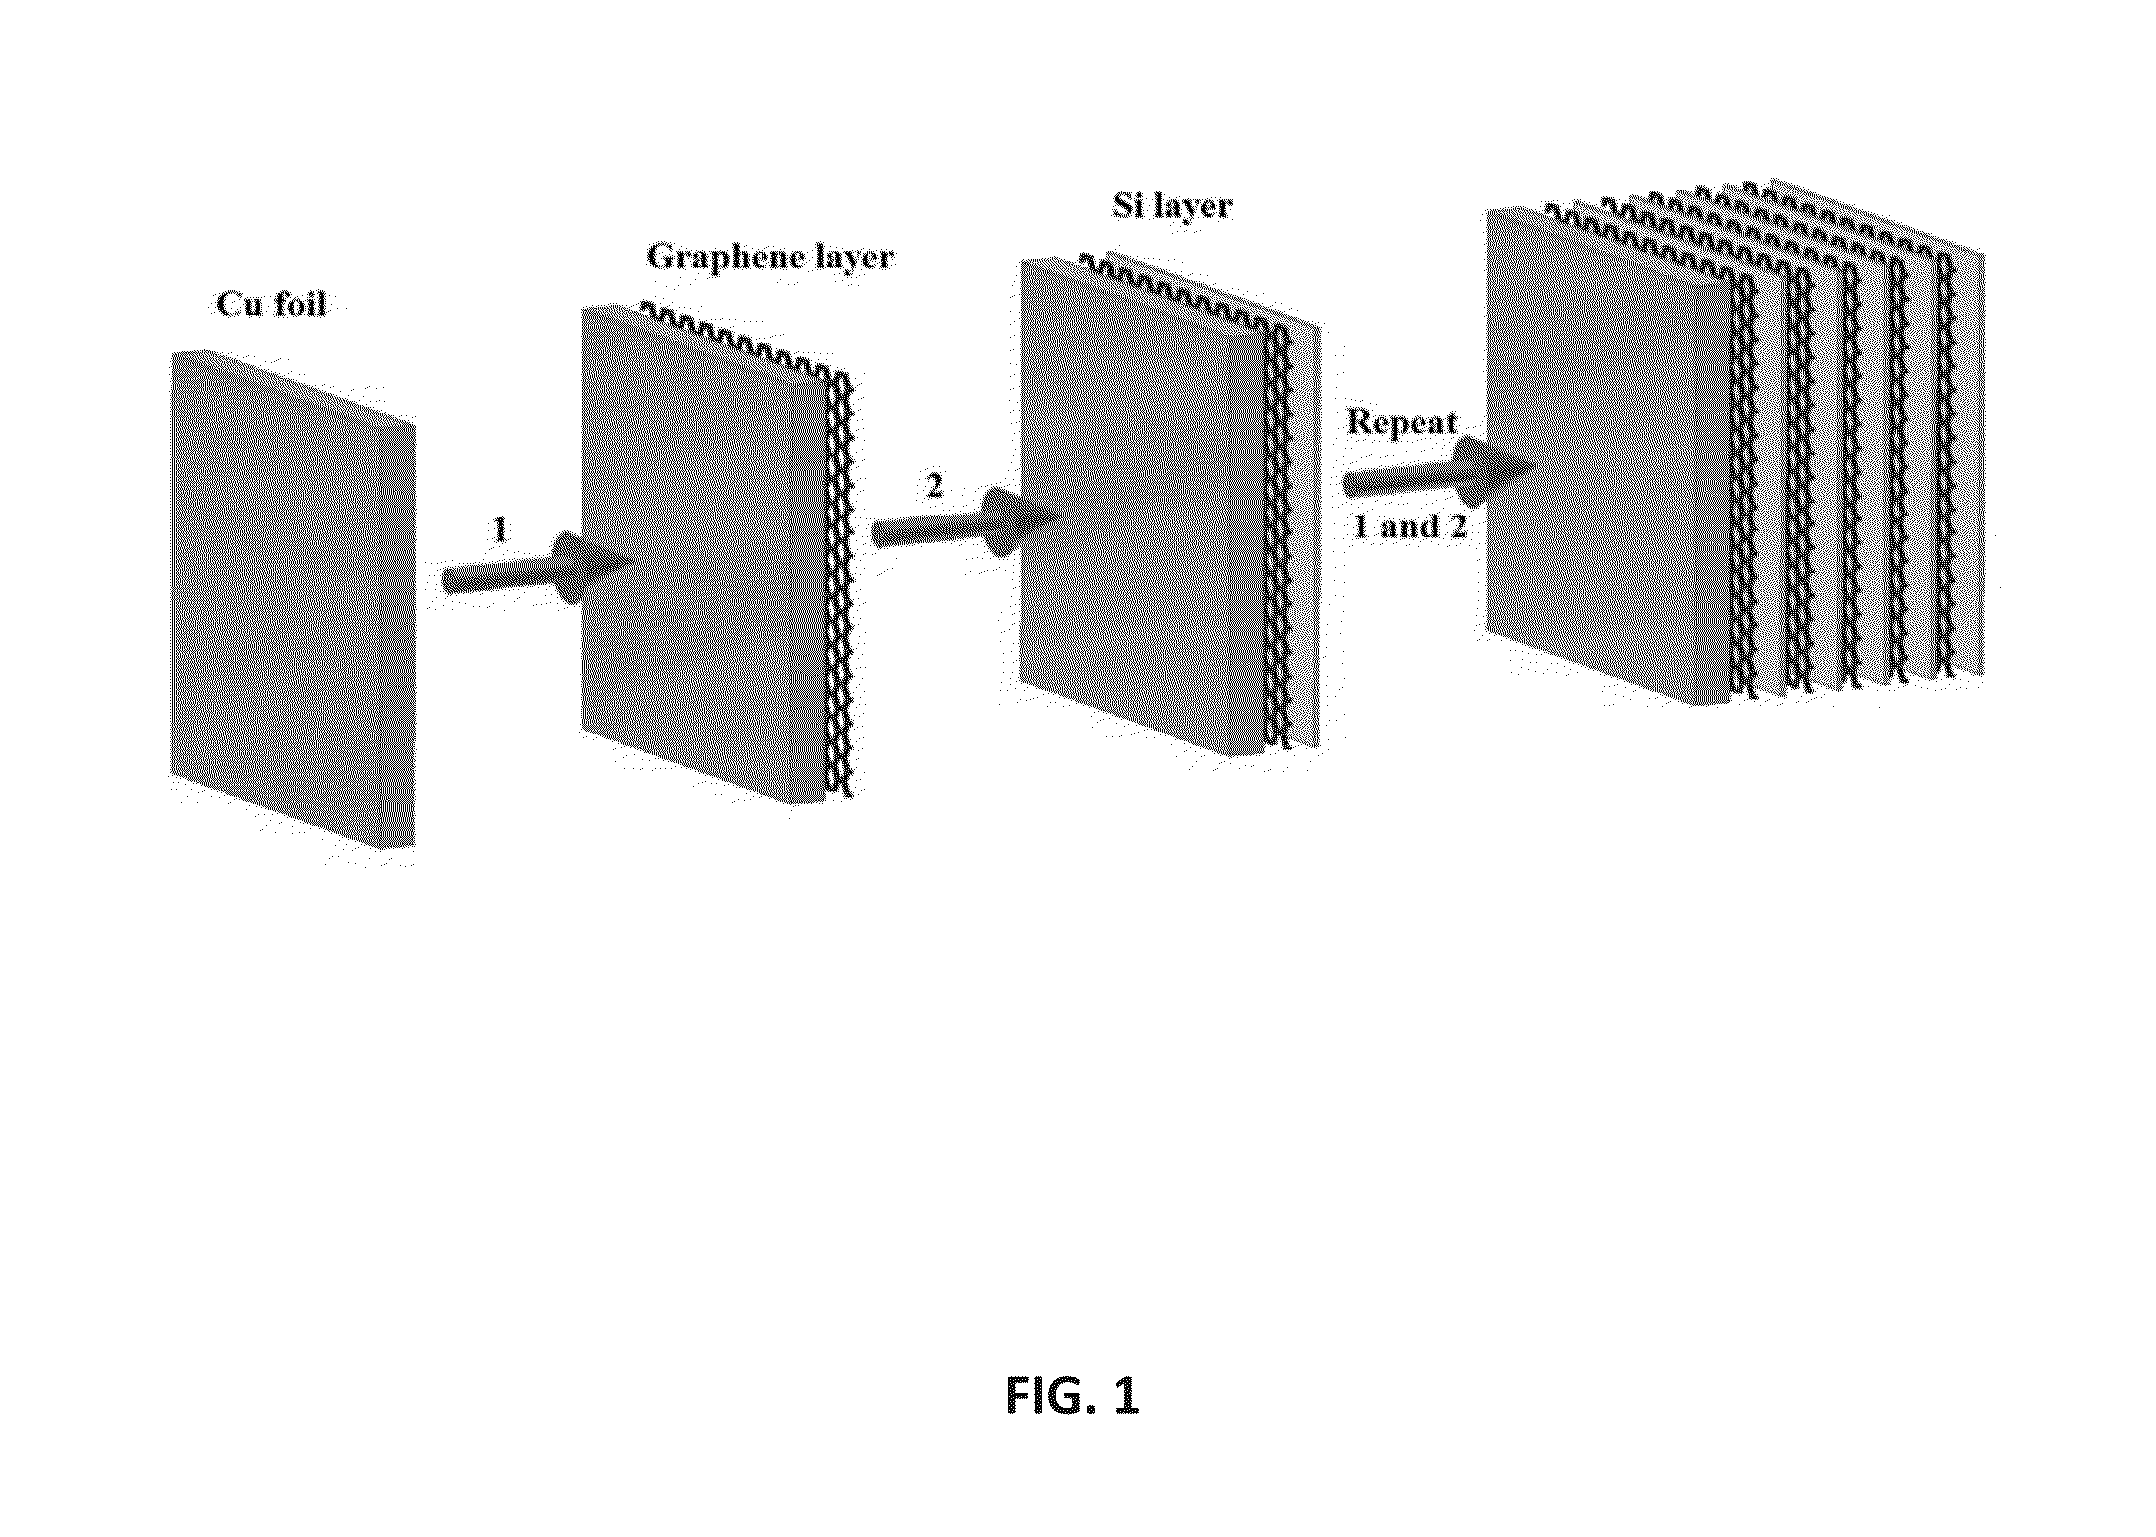 Method for the preparation of graphene/silicon multilayer structured anodes for lithium ion batteries